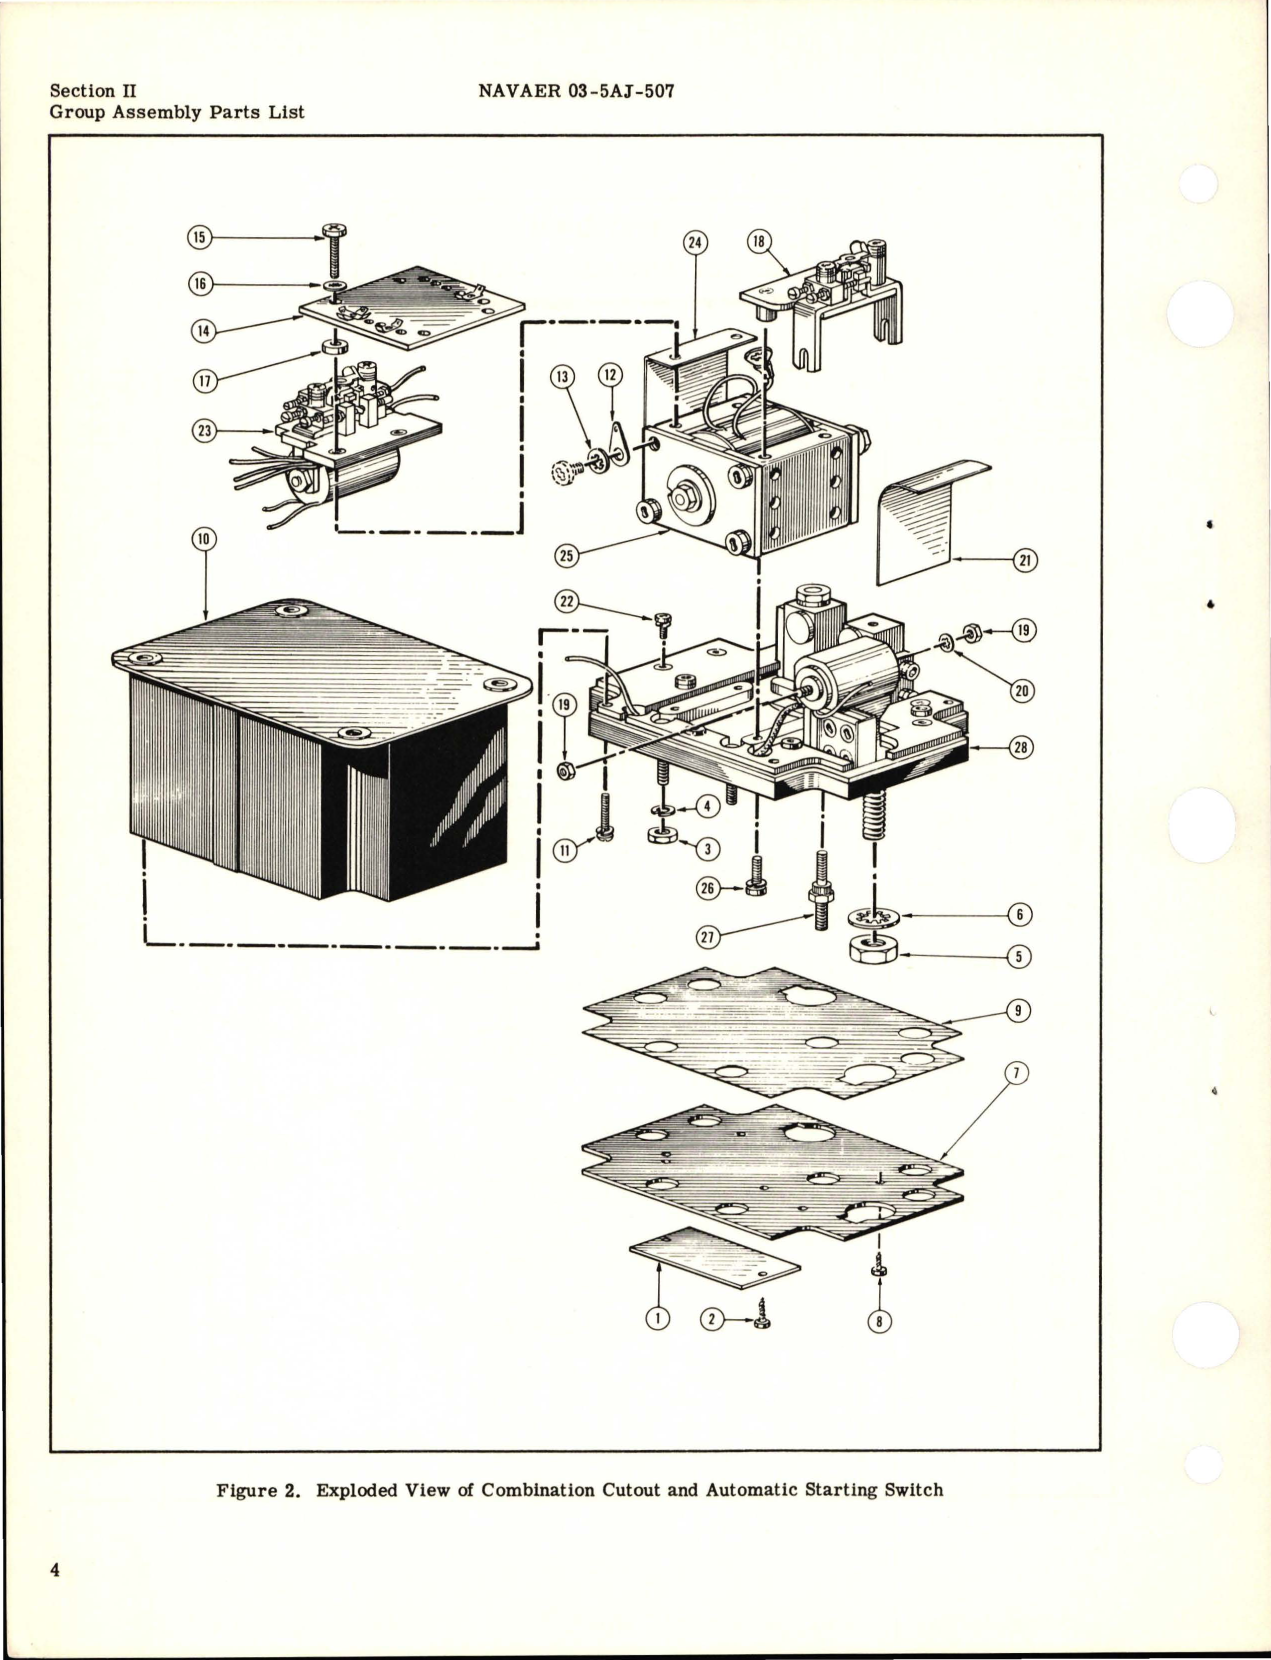 Sample page 6 from AirCorps Library document: Illustrated Parts Breakdown for Combination Cutout and Automatic Starting Switch - Model A-766 